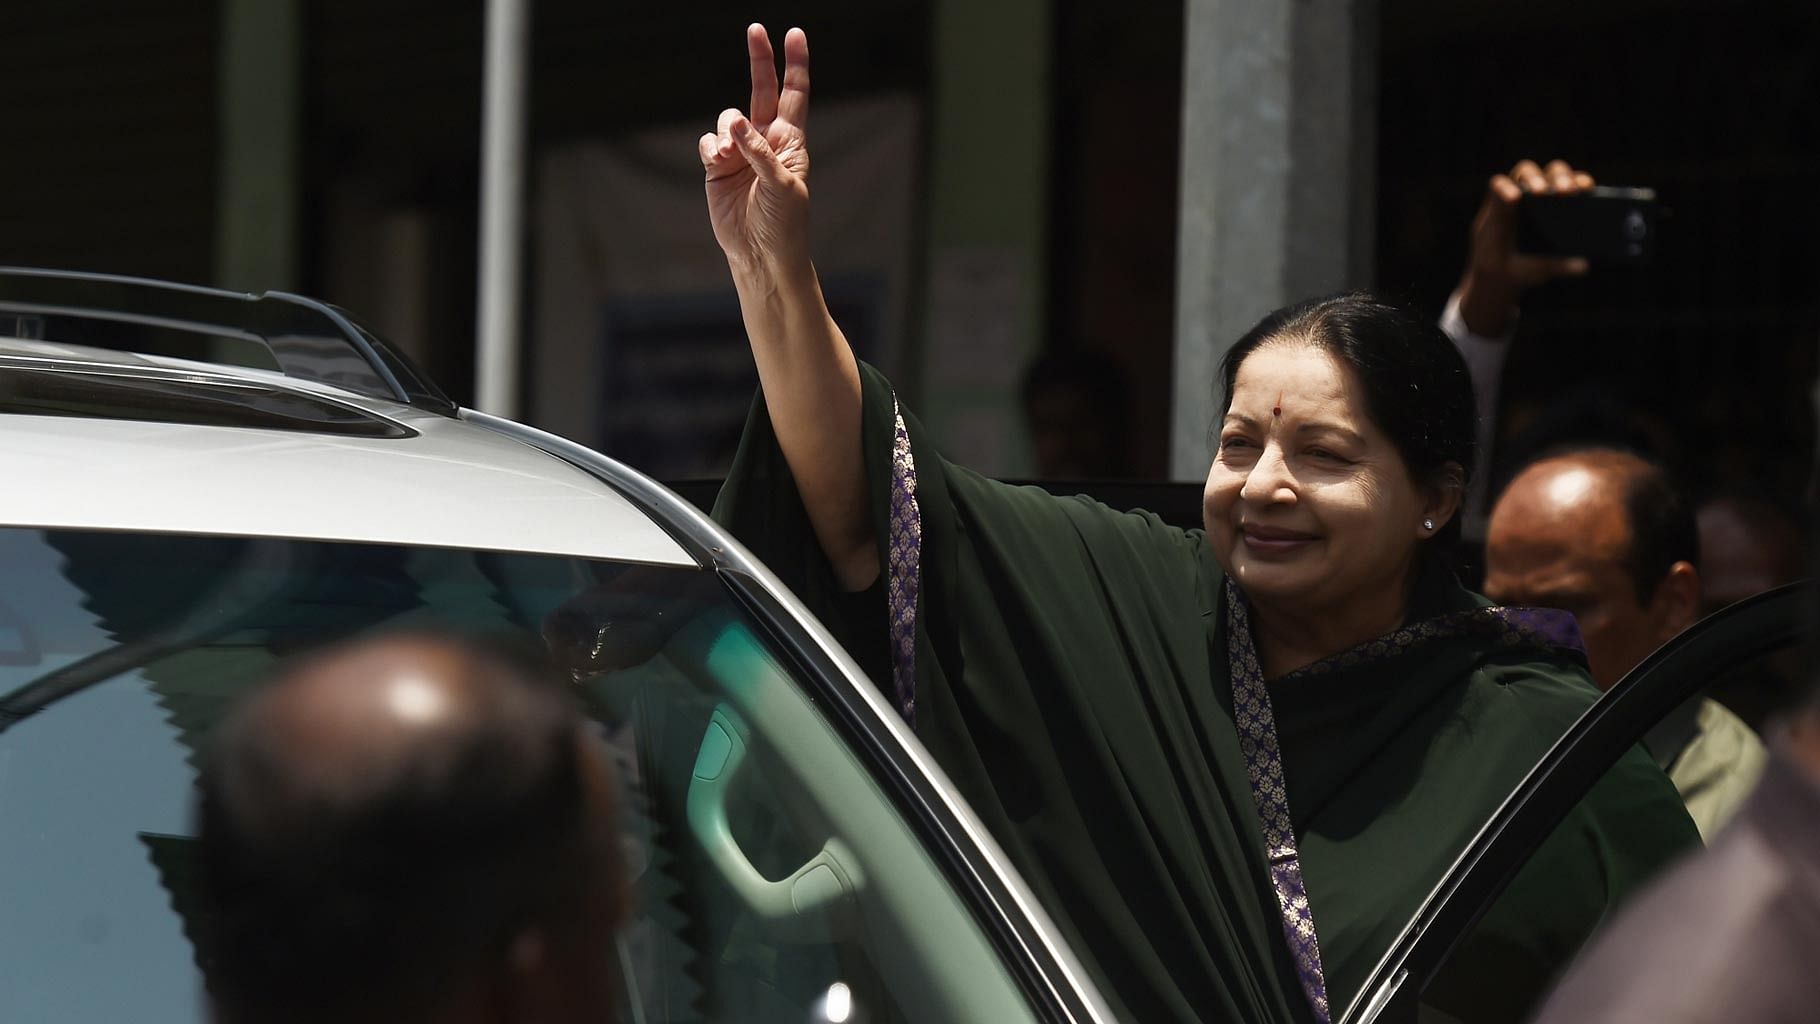 Tamil Nadu Chief Minister and AIDMK chief J Jayalalithaa comes out after filing her nomination papers in Chennai, on 25 April 2016. (Photo: IANS)